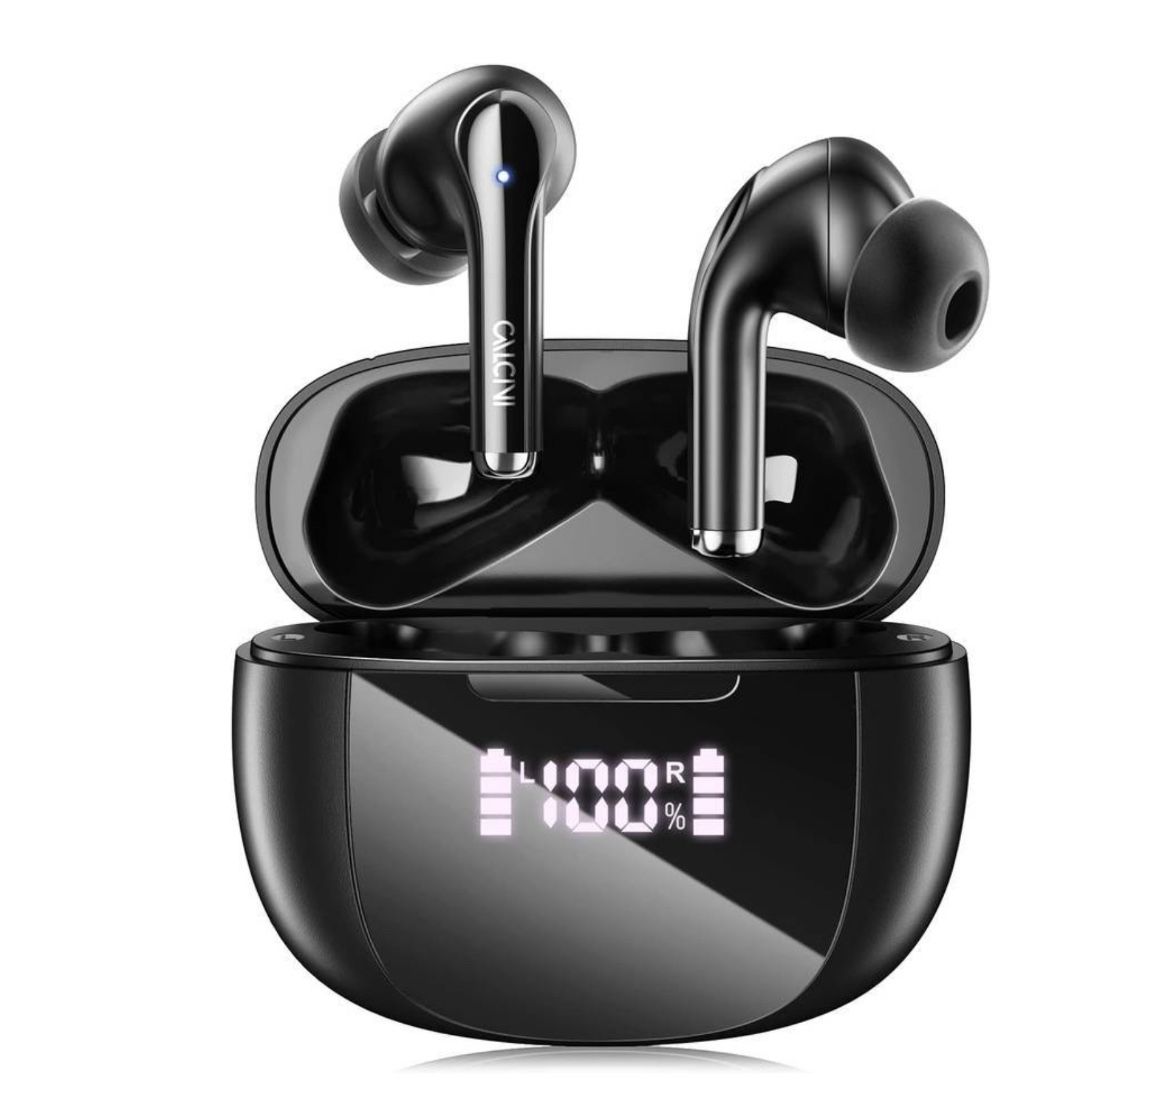 new  True Wireless Earbuds Bluetooth 5.3 with Microphone, TWS Ear-buds In-ear Headphones with Charging Case,Waterproof Cordless Blue-tooth Earphones f